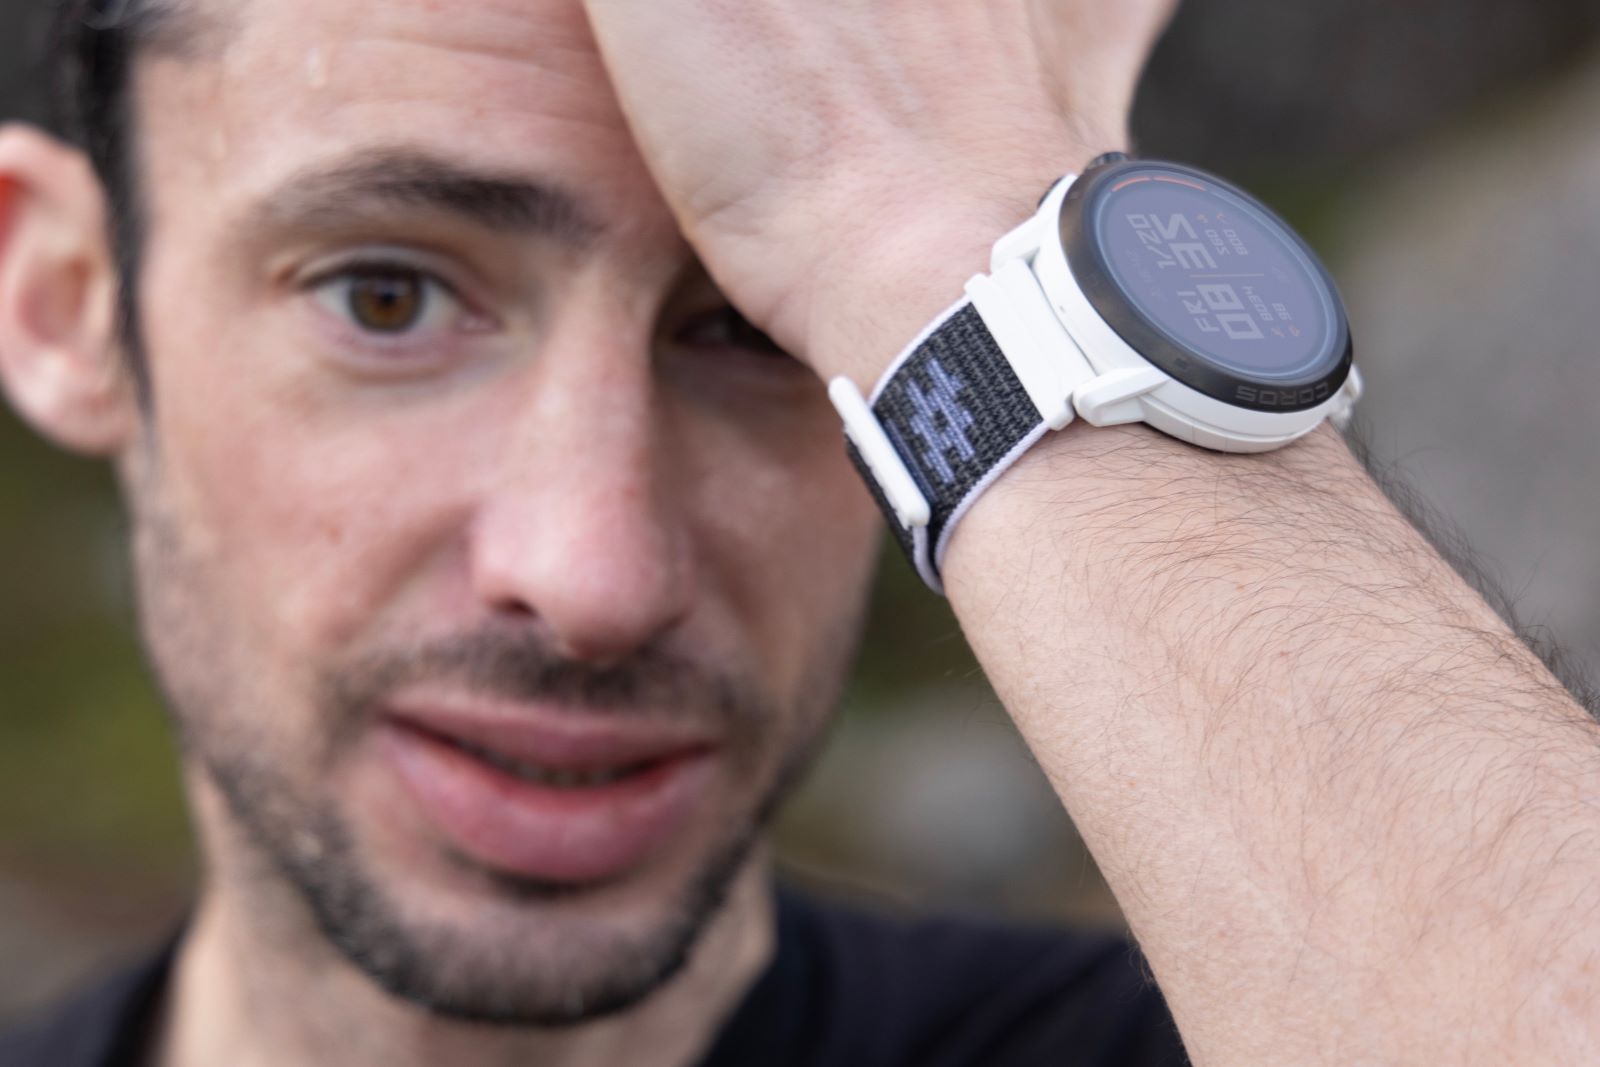 Kilian Jornet teams up with Coros for limited-edition GPS watch - Canadian Running Magazine